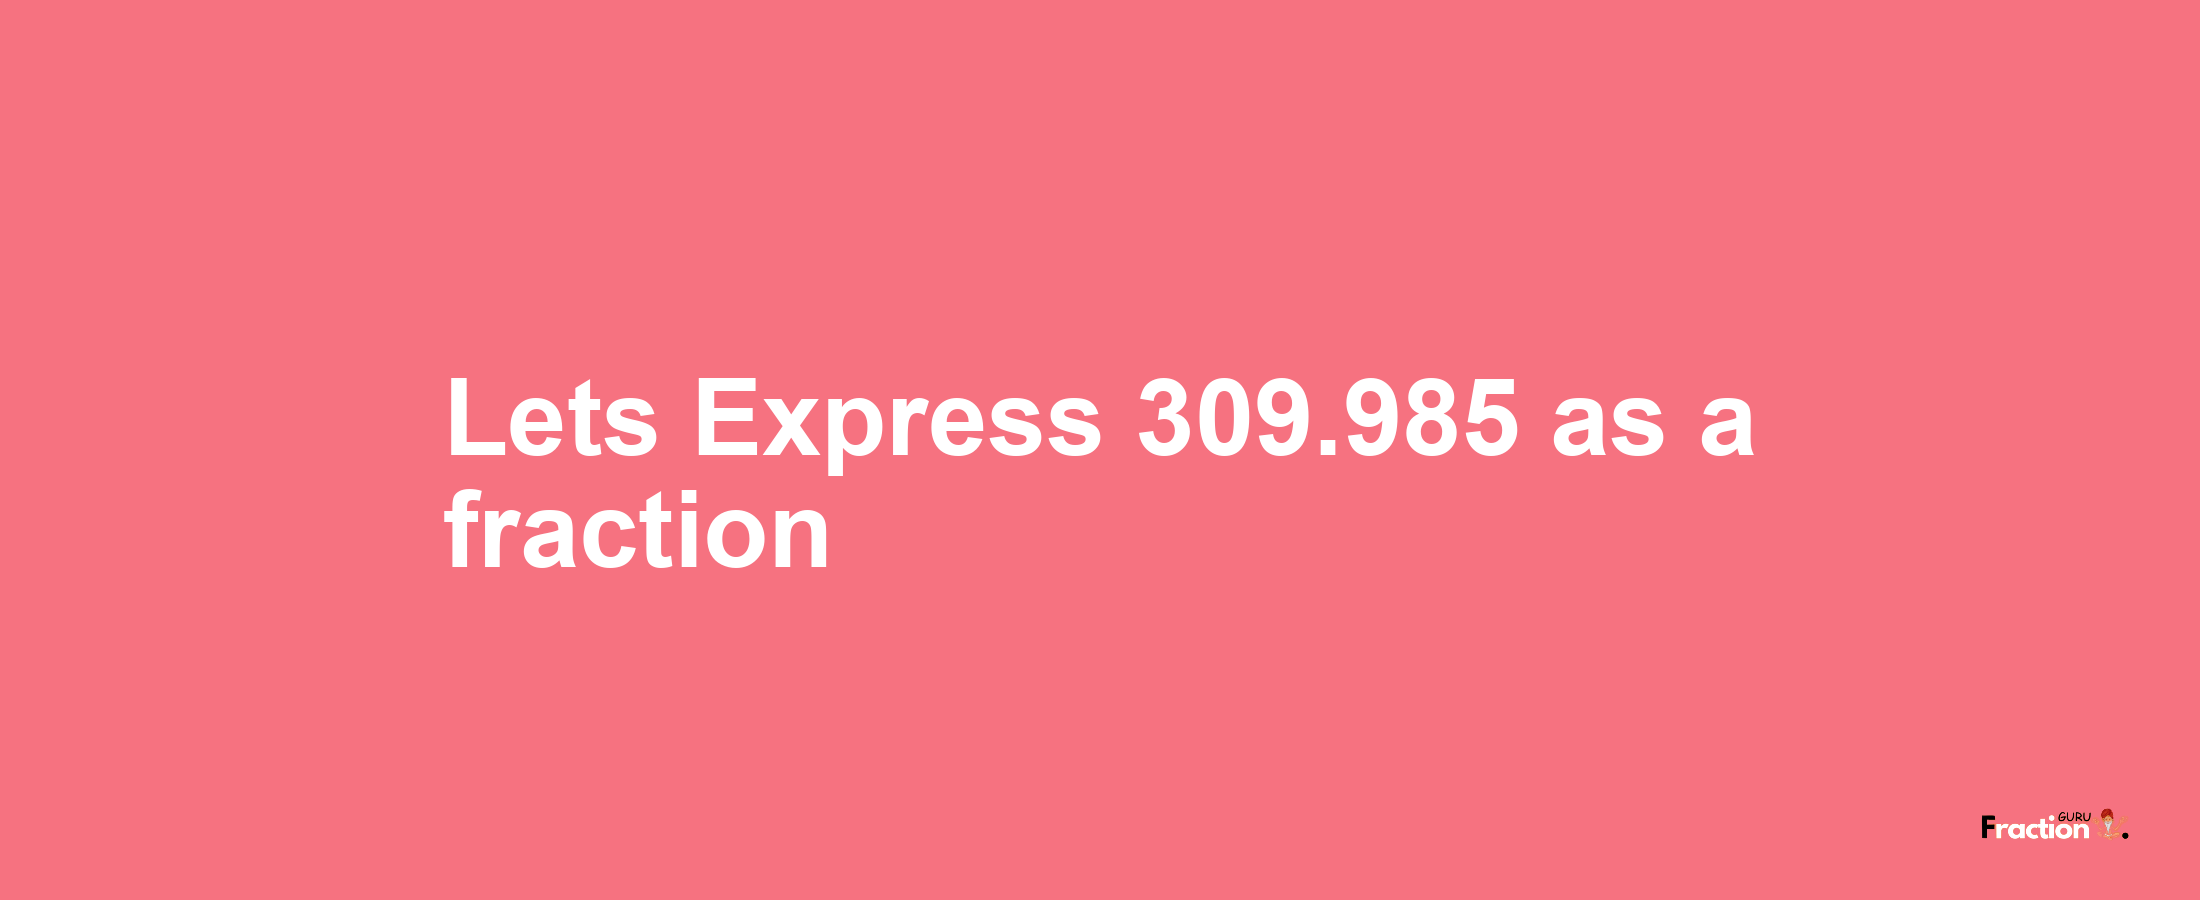 Lets Express 309.985 as afraction